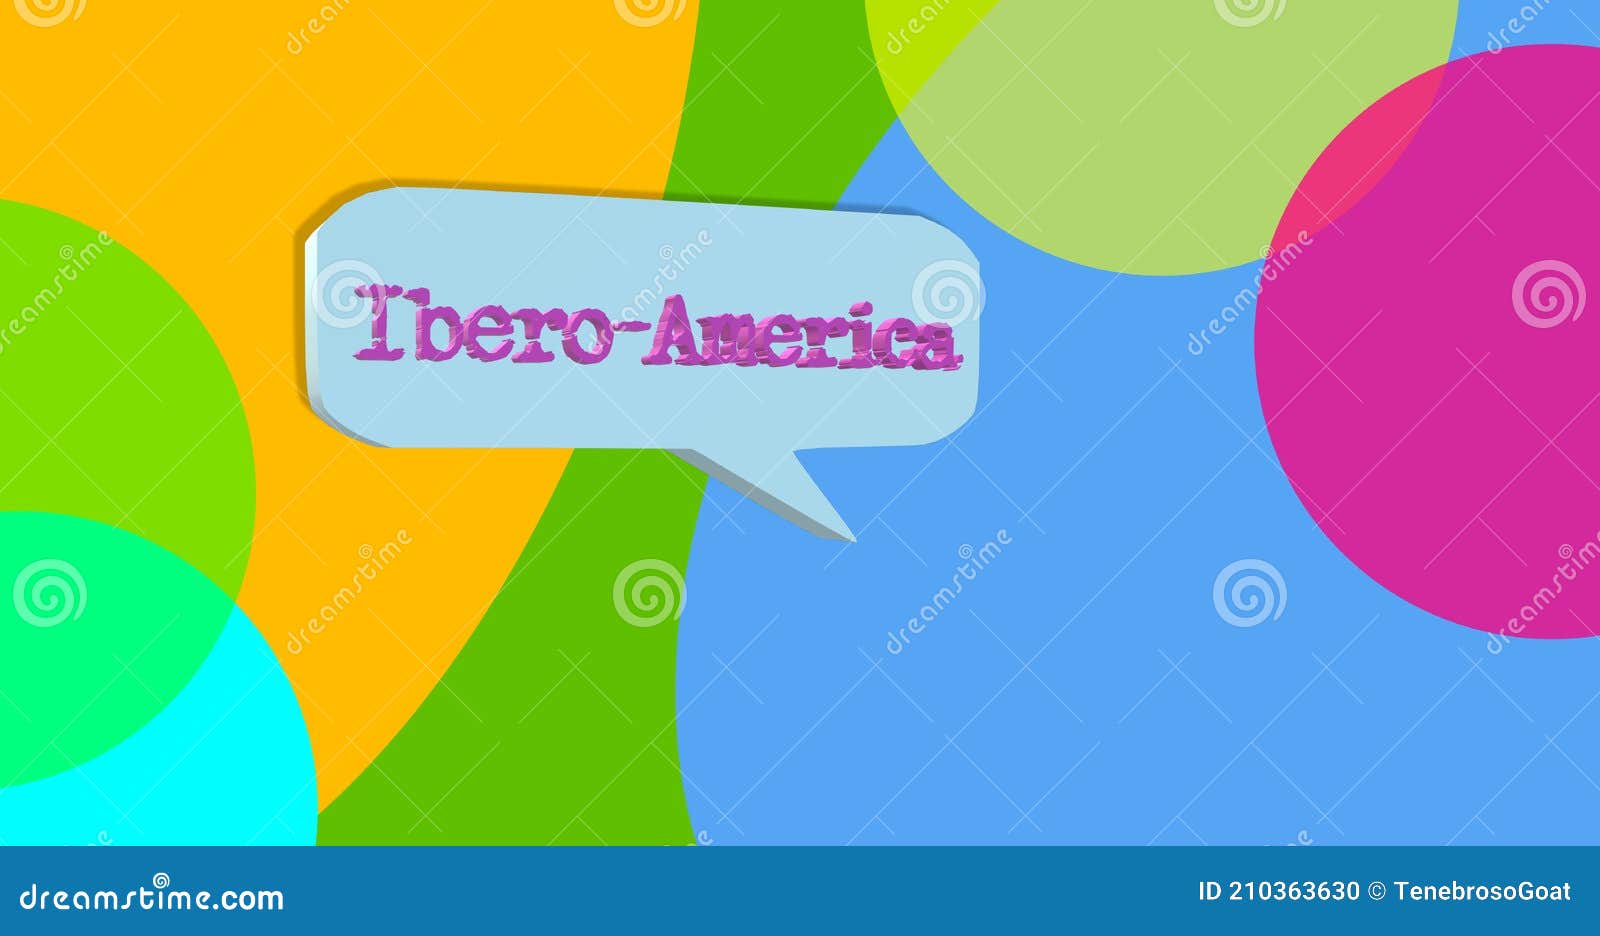 the word ibero america inside a dialog balloon. colorful banner for speech bubble and abstract background. poster.